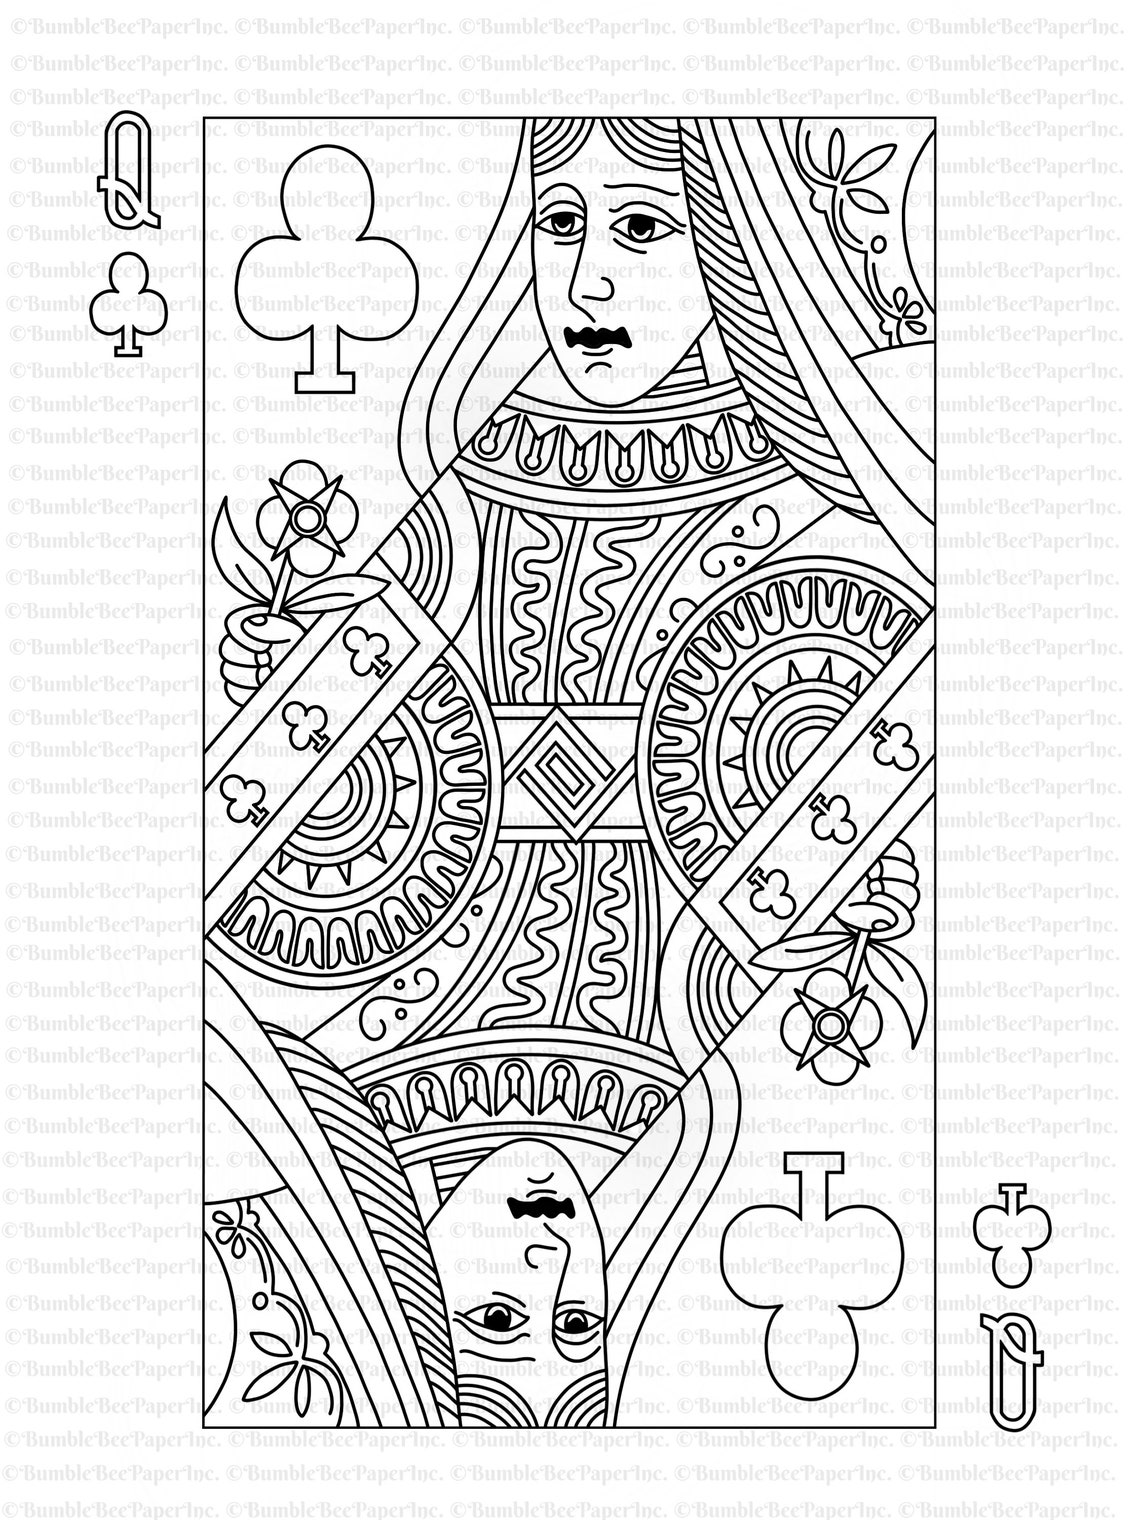 Queen of Clubs Playing Card Coloring Page/wall Art - Etsy